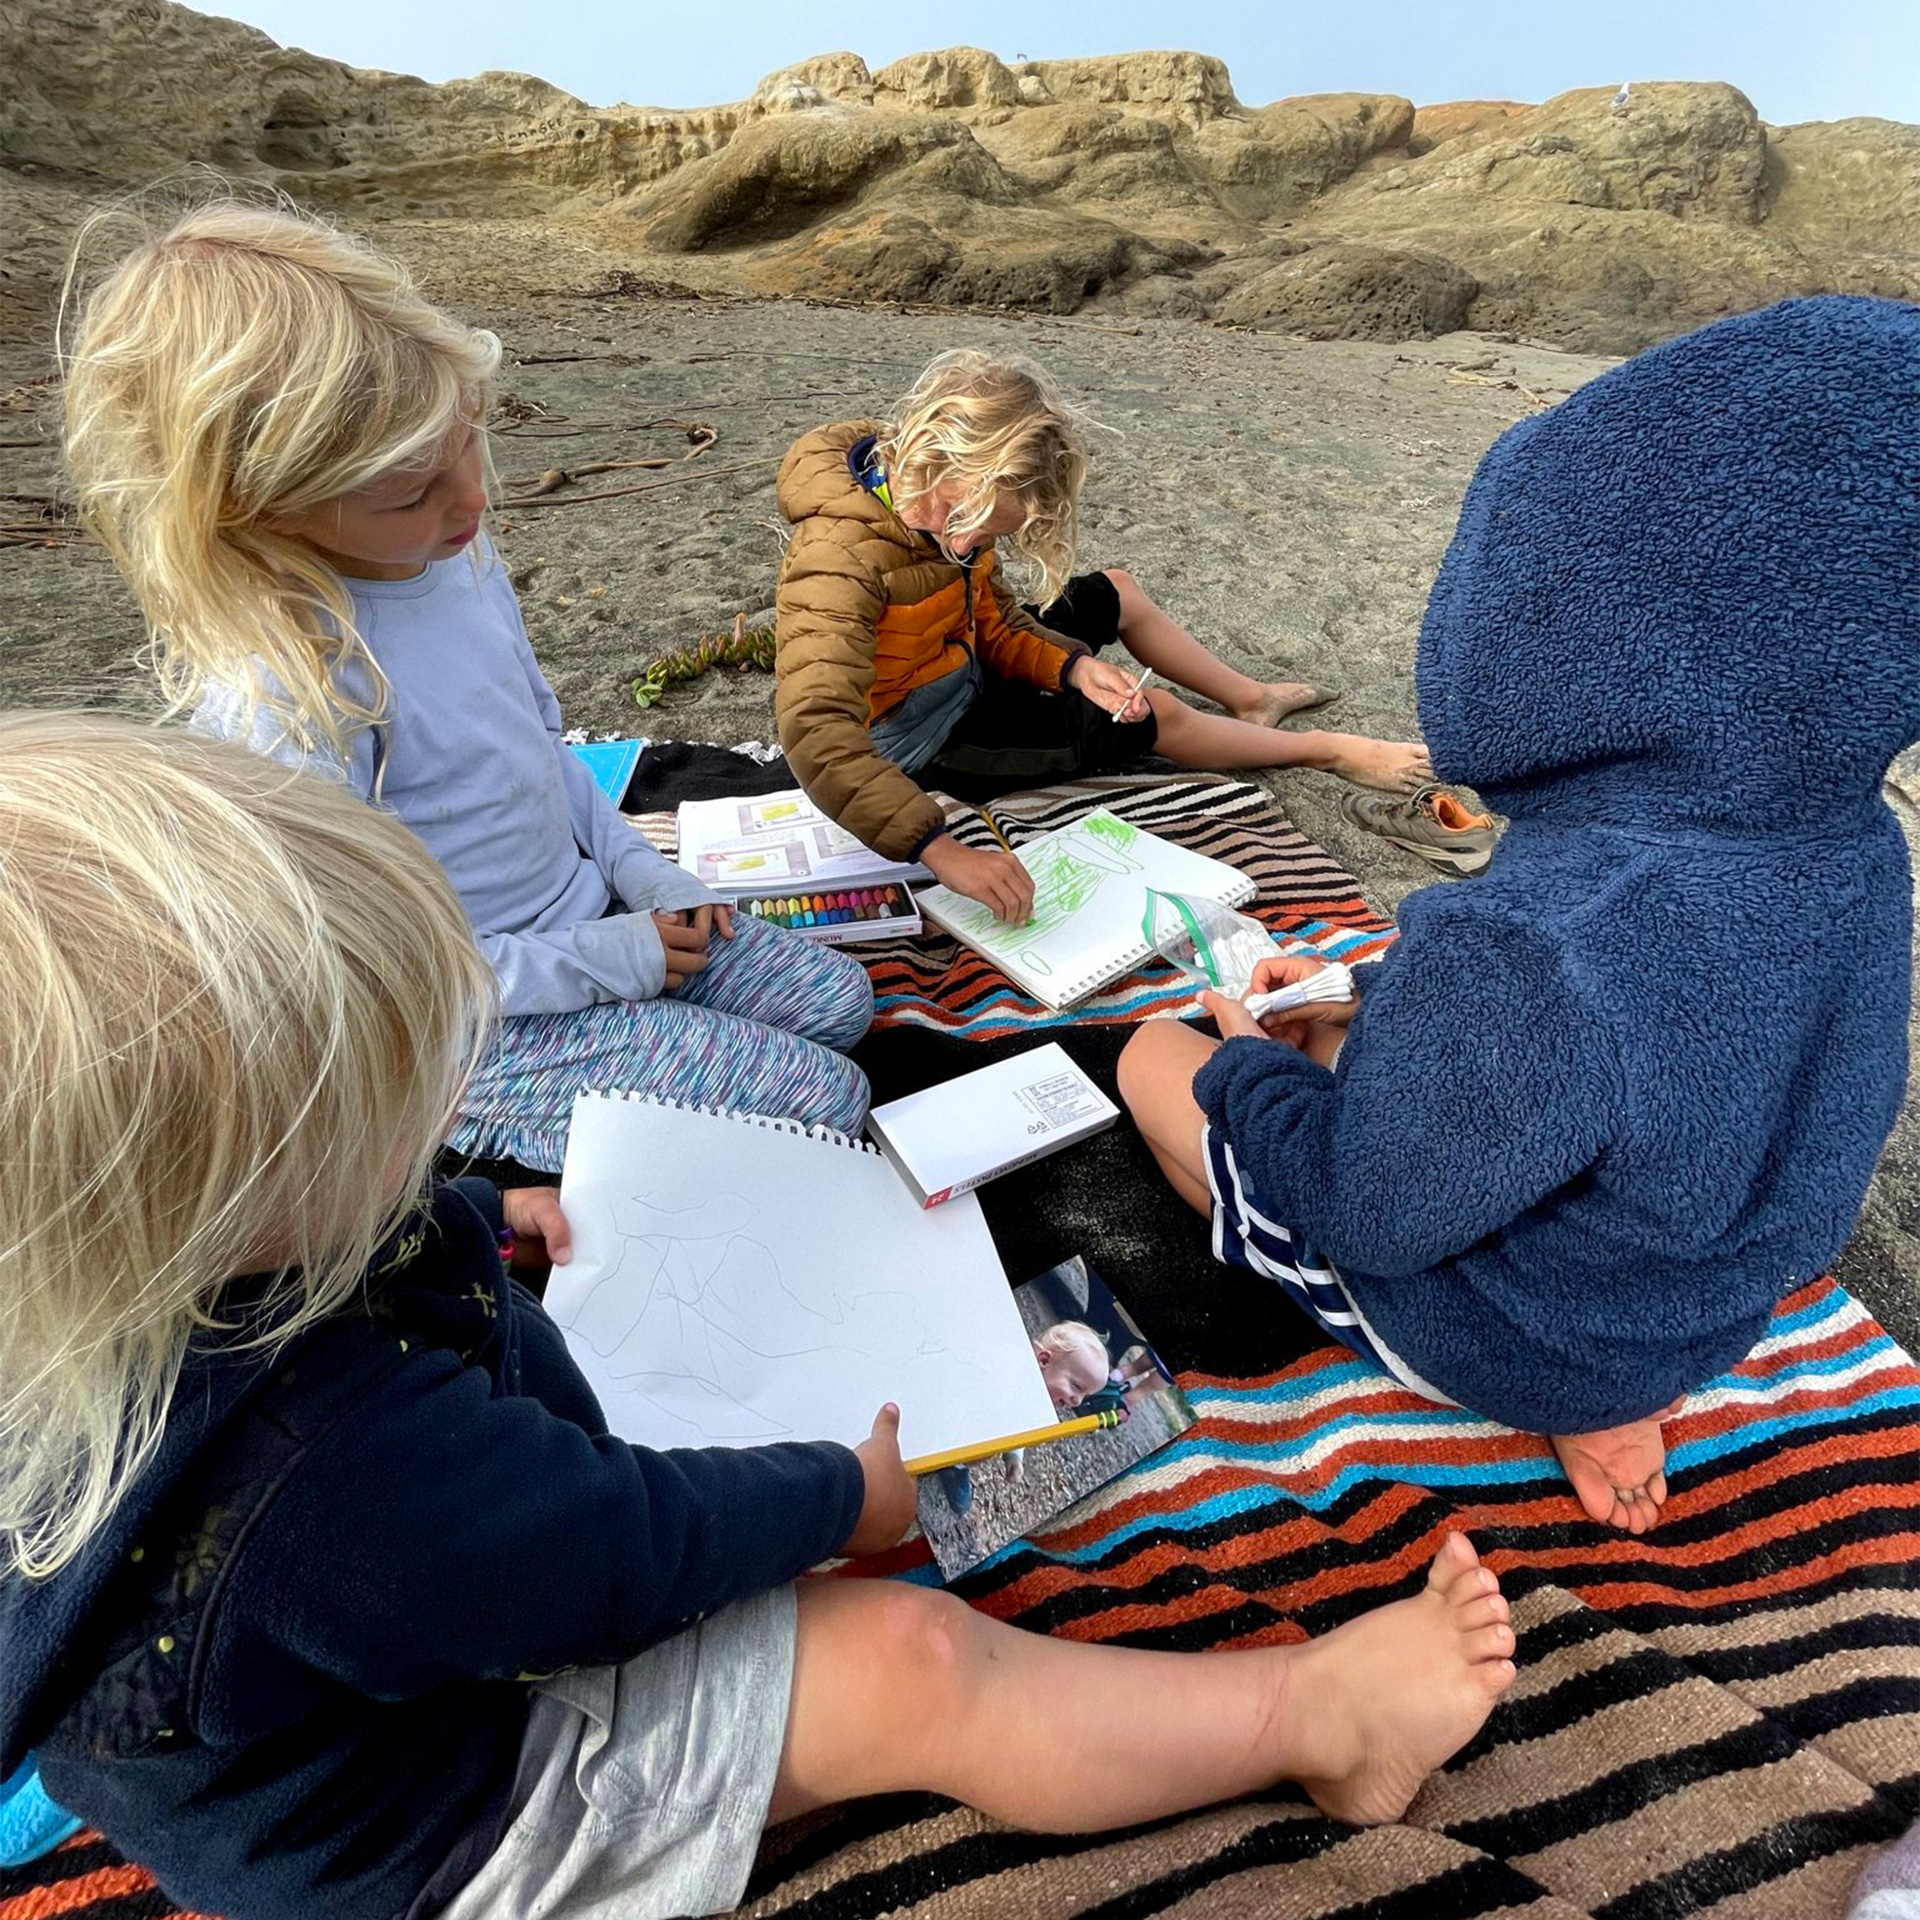 Children sitting on a blanket in the sand coloring.